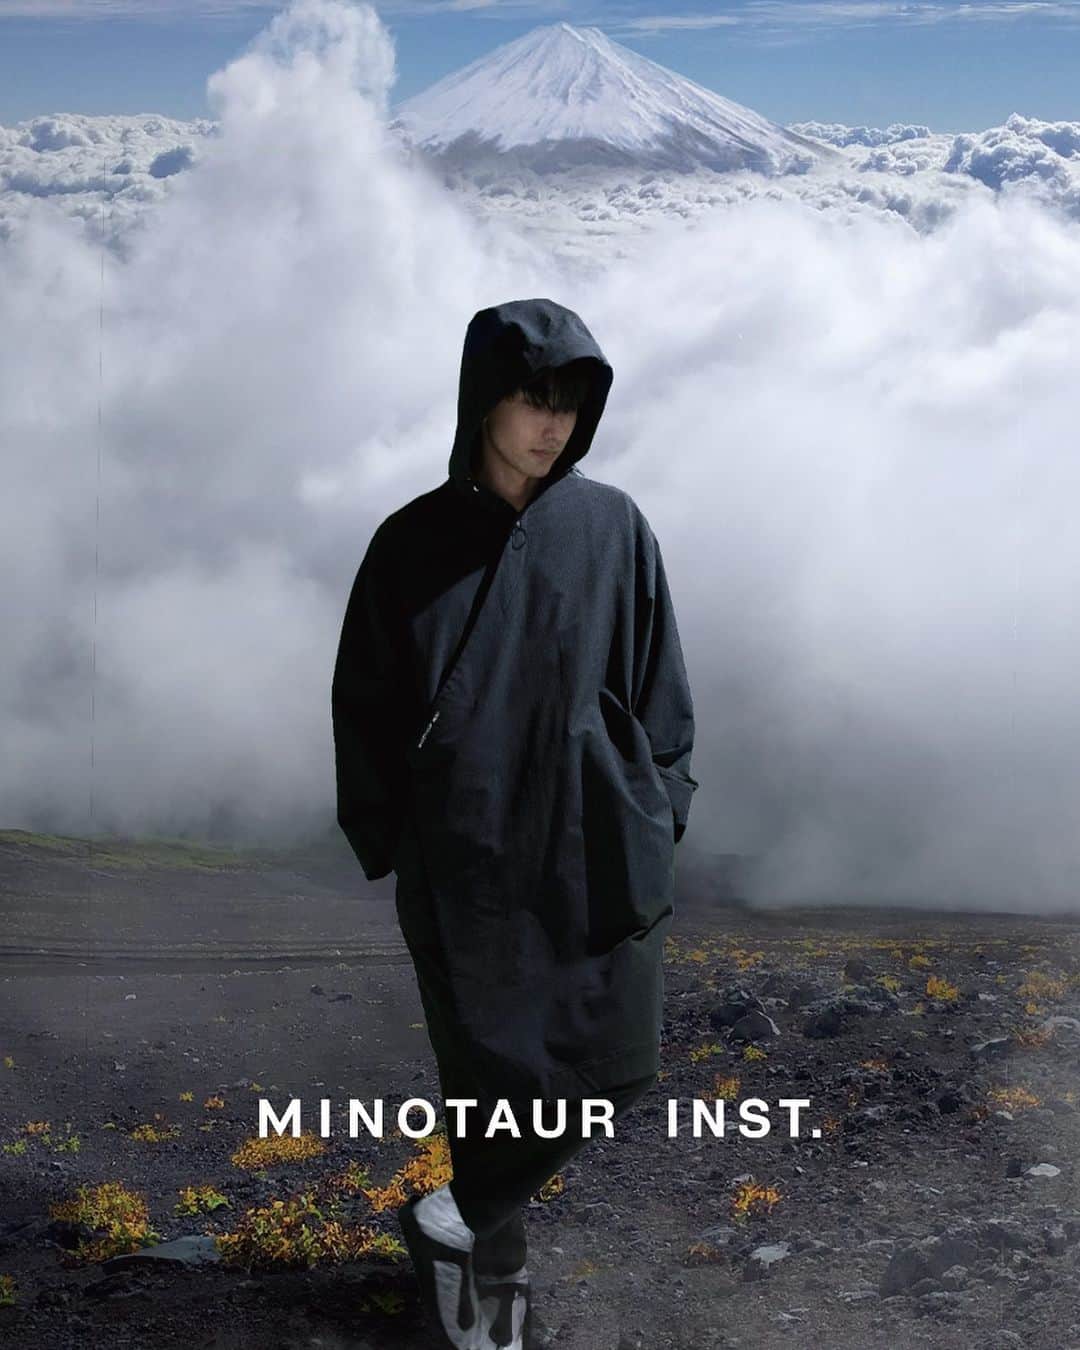 ミノトールさんのインスタグラム写真 - (ミノトールInstagram)「MINOTAUR INST. MF HOOD COAT  FUNCTION : WATER REPELLENT WATER ABSORPTION STRETCH MACHINE WASHABLE NO WRINKLES  Made in Japan  高い撥水性、ストレッチ性に優れた機能素材を使用した軽快な和モダンコート。 生地表面は撥水加工仕上げの為、外気の冷たい雨風ををカット。内側は保温性の高いボアフリース仕様で肌触りが良く重ね着を軽減。 家庭用洗濯機で洗濯可能なのでお手入れも簡単。 フロント部分にジップやボタンはなく、脇部分のバックル調整ストラップにより、ワンタッチホールドでの開閉が可能に。  A lightweight modern Japanese coat made of functional material with excellent water repellency and stretch properties. The surface of the fabric has a water-repellent finish, so it blocks the cold rain and wind from outside. The inside is made of boa fleece with high heat retention, which feels good against the skin and reduces layering. It is easy to clean as it can be washed in a household washing machine. There are no zips or buttons on the front, and the buckle adjustment straps on the sides allow you to open and close with one touch.  #minotaur_inst #minotaurinst #minotaur #minotaur_shop #ミノトールインスト #ミノトール  #zen #mindfulness #mindfulnesswear #機能アウター #テクニカルフード #techpants #機能パンツ #relaxsmart #リラックススマート #はかまパンツ #hakamapants #hakama #japanesemodan」10月5日 19時46分 - minotaur_inst._official